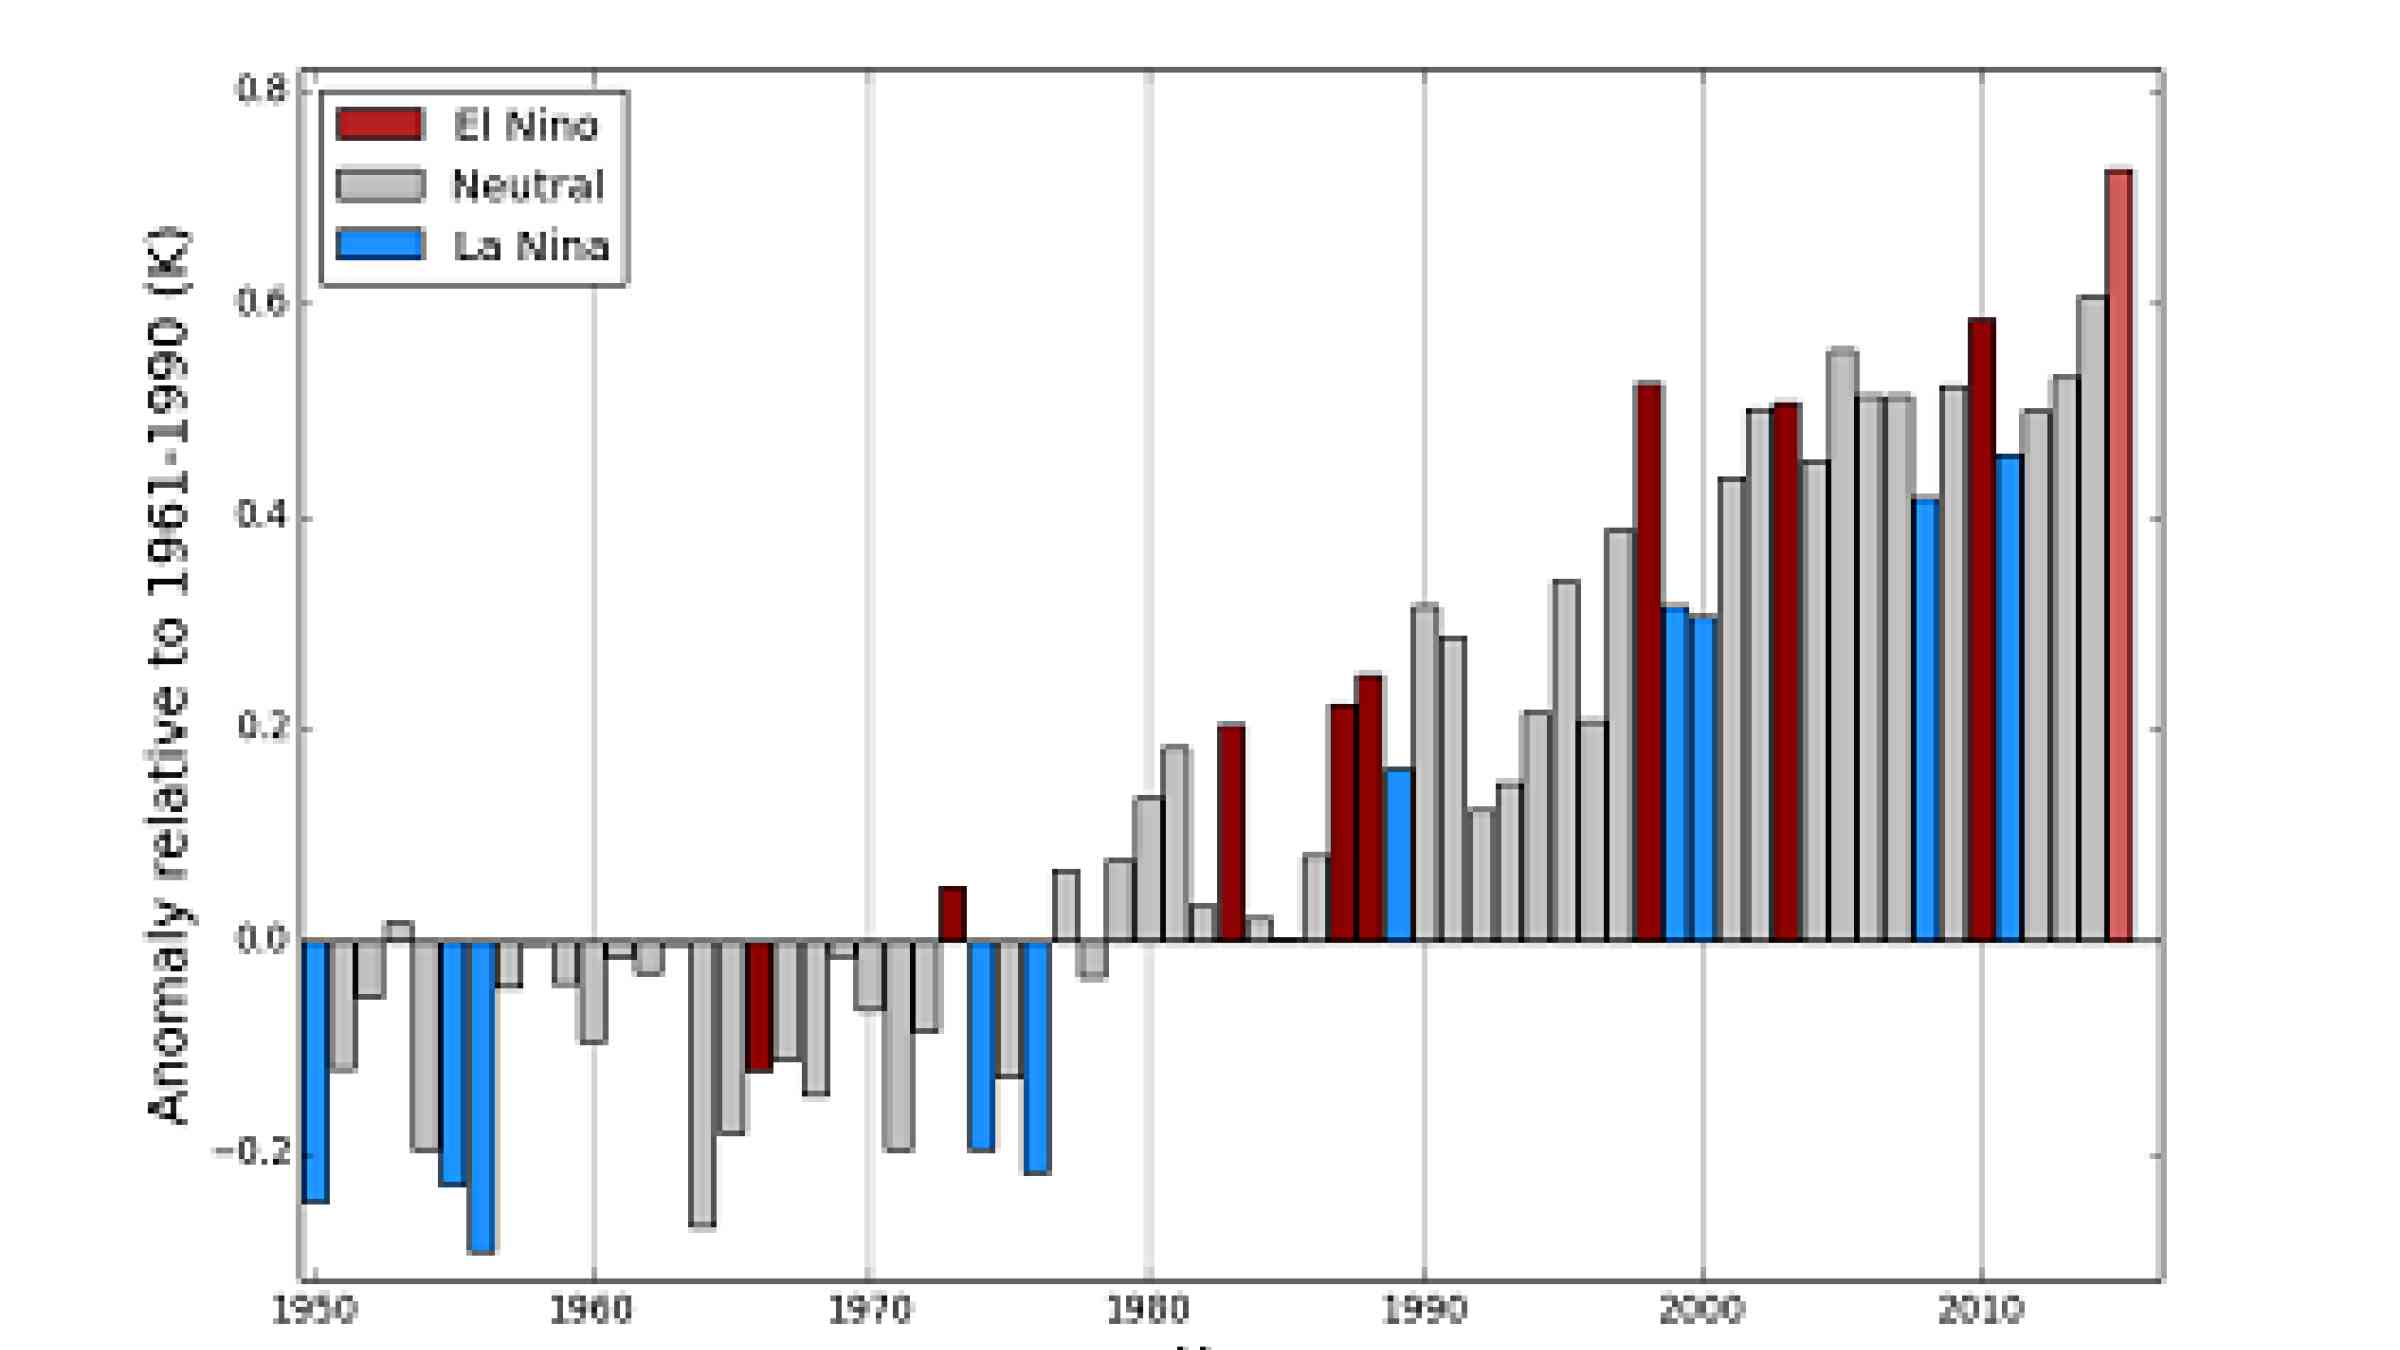 Global annual average temperatures anomalies (relative to 1961-1990) based on an average of three global temperature data sets (HadCRUT.4.4.0.0, GISTEMP and NOAAGlobalTemp) from 1950 to 2014. The 2015 average is based on data from January to October. Bars are coloured according to whether the year was classified as an El Niño year (red), a La Niña year (blue) or an ENSO-neutral year (grey). Note uncertainty ranges are not shown, but are around 0.1°C (Credit: WMO)